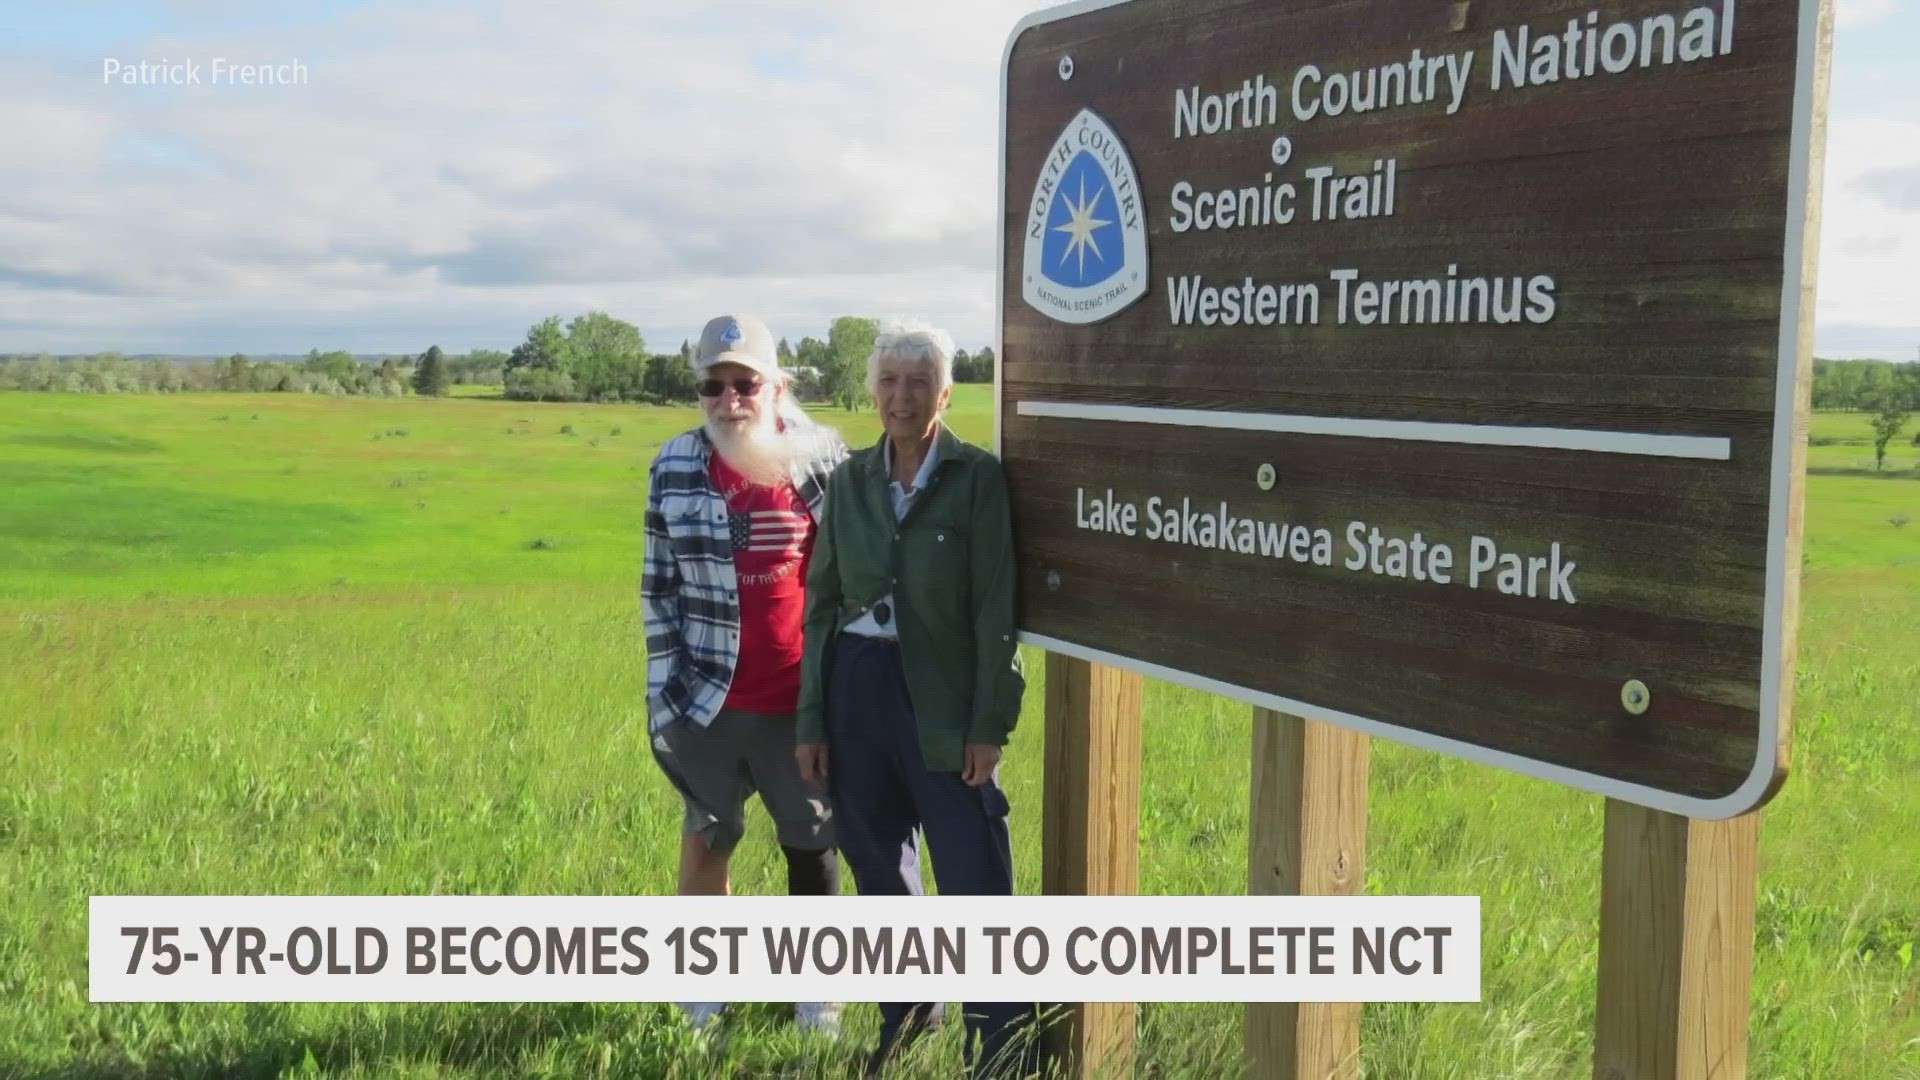 Imagine hiking from Vermont to North Dakota, now imagine doing that at 75-years-old. 
That’s just what Michigander Joan Young did.